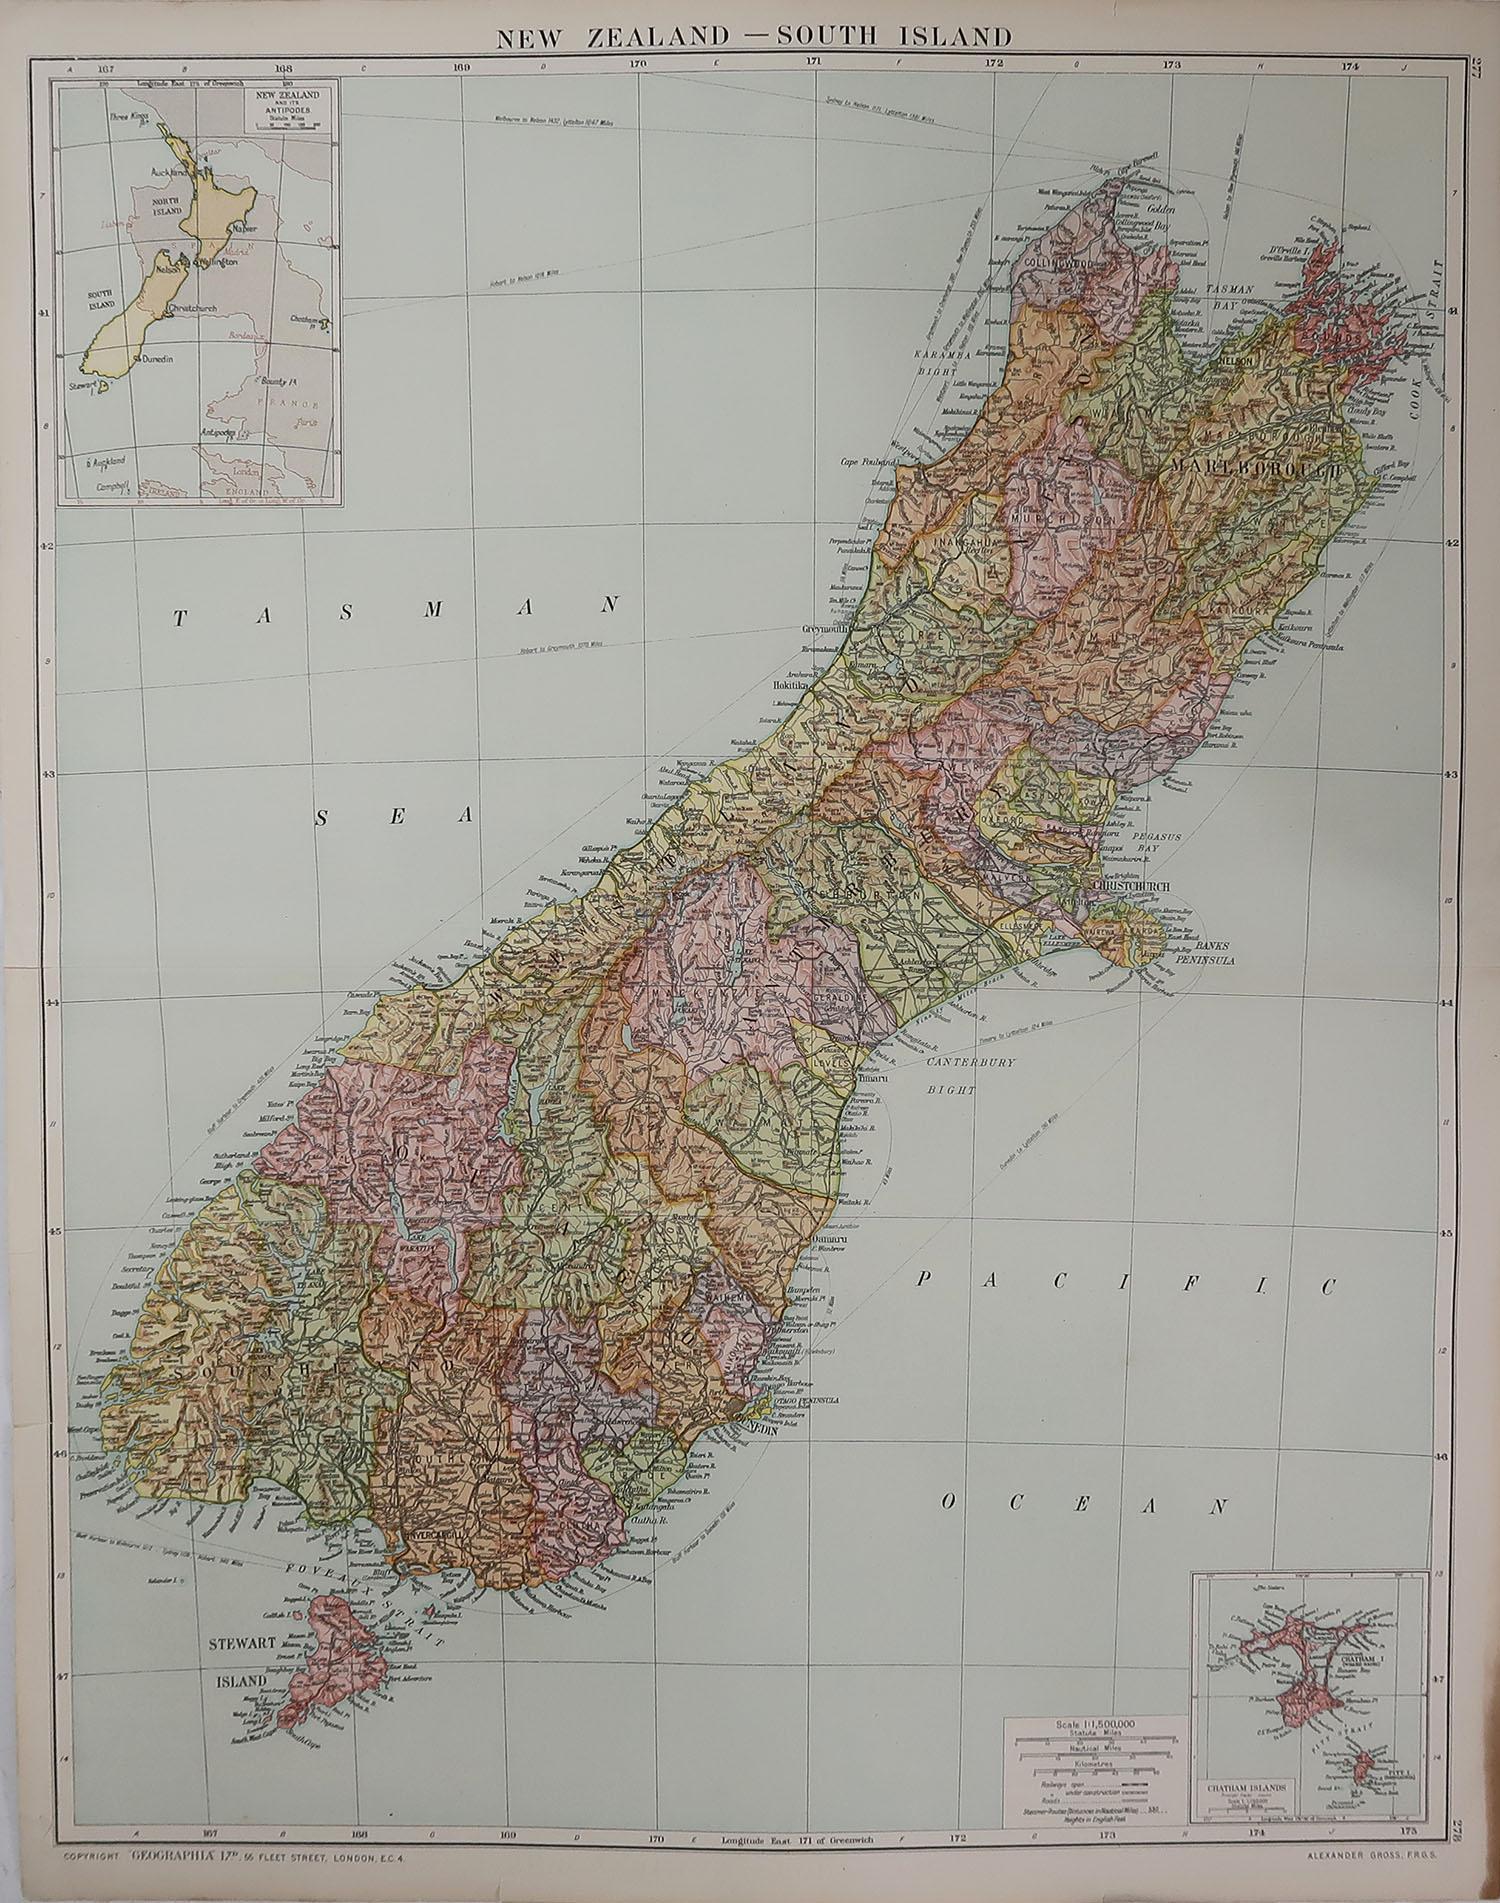 Great map of South Island, New Zealand

Original color. 

Good condition 

Published by Alexander Gross

Unframed.








